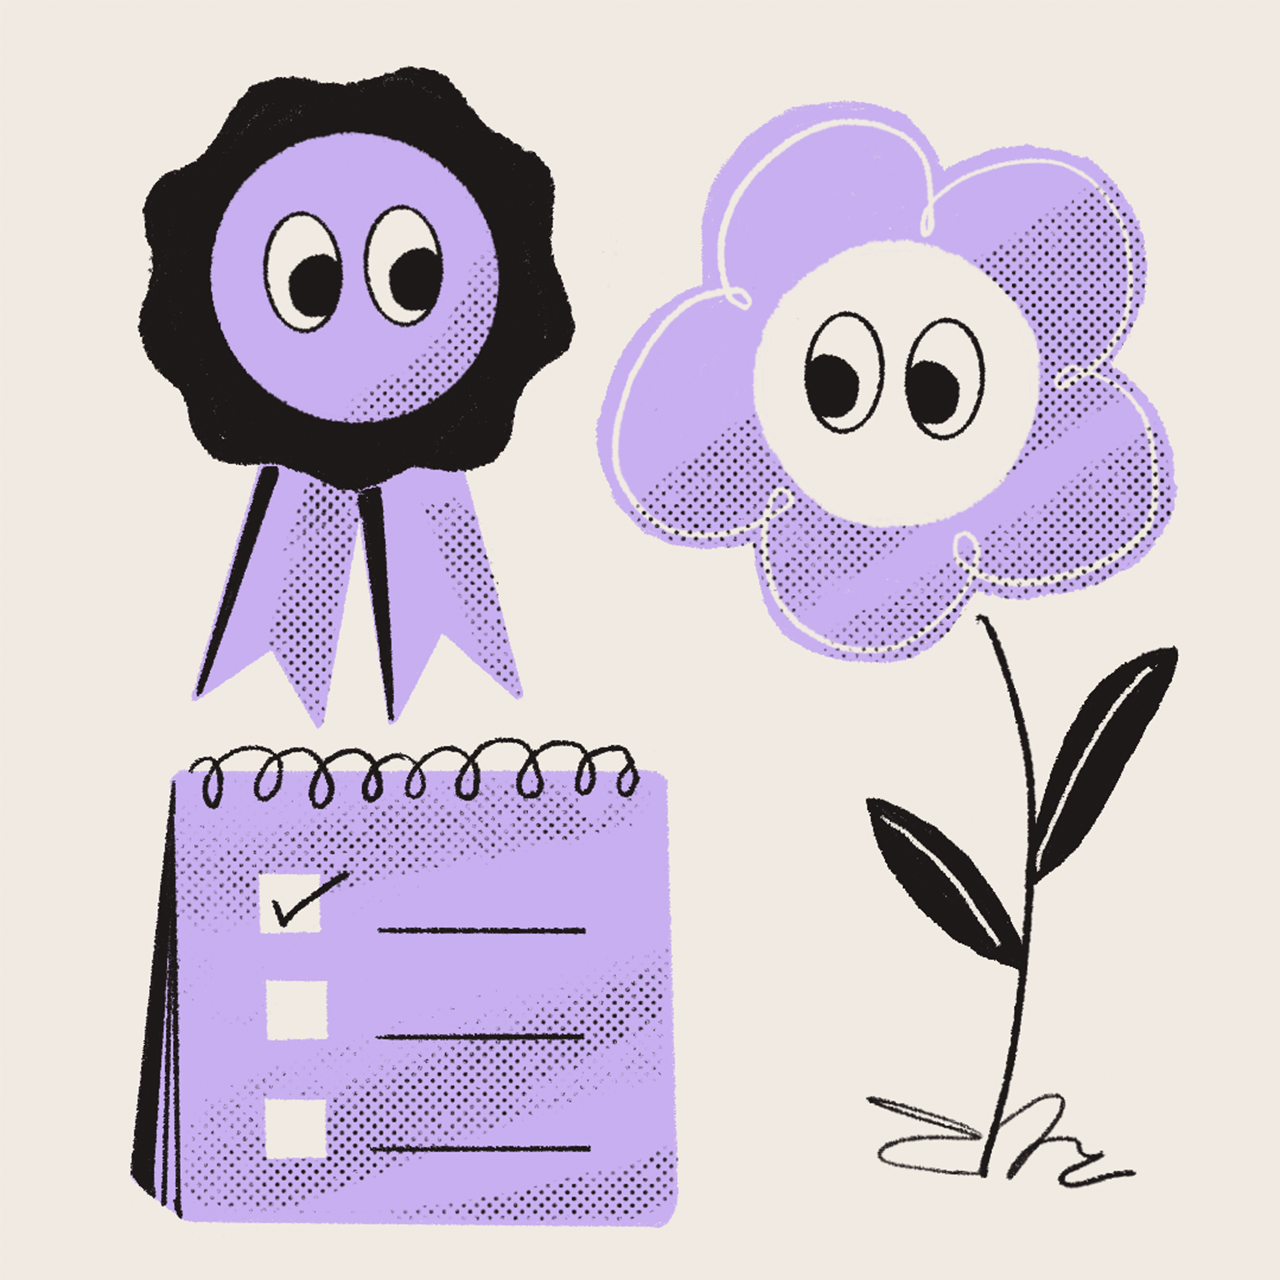 An illustration of a purple award badge, flower and to-do list